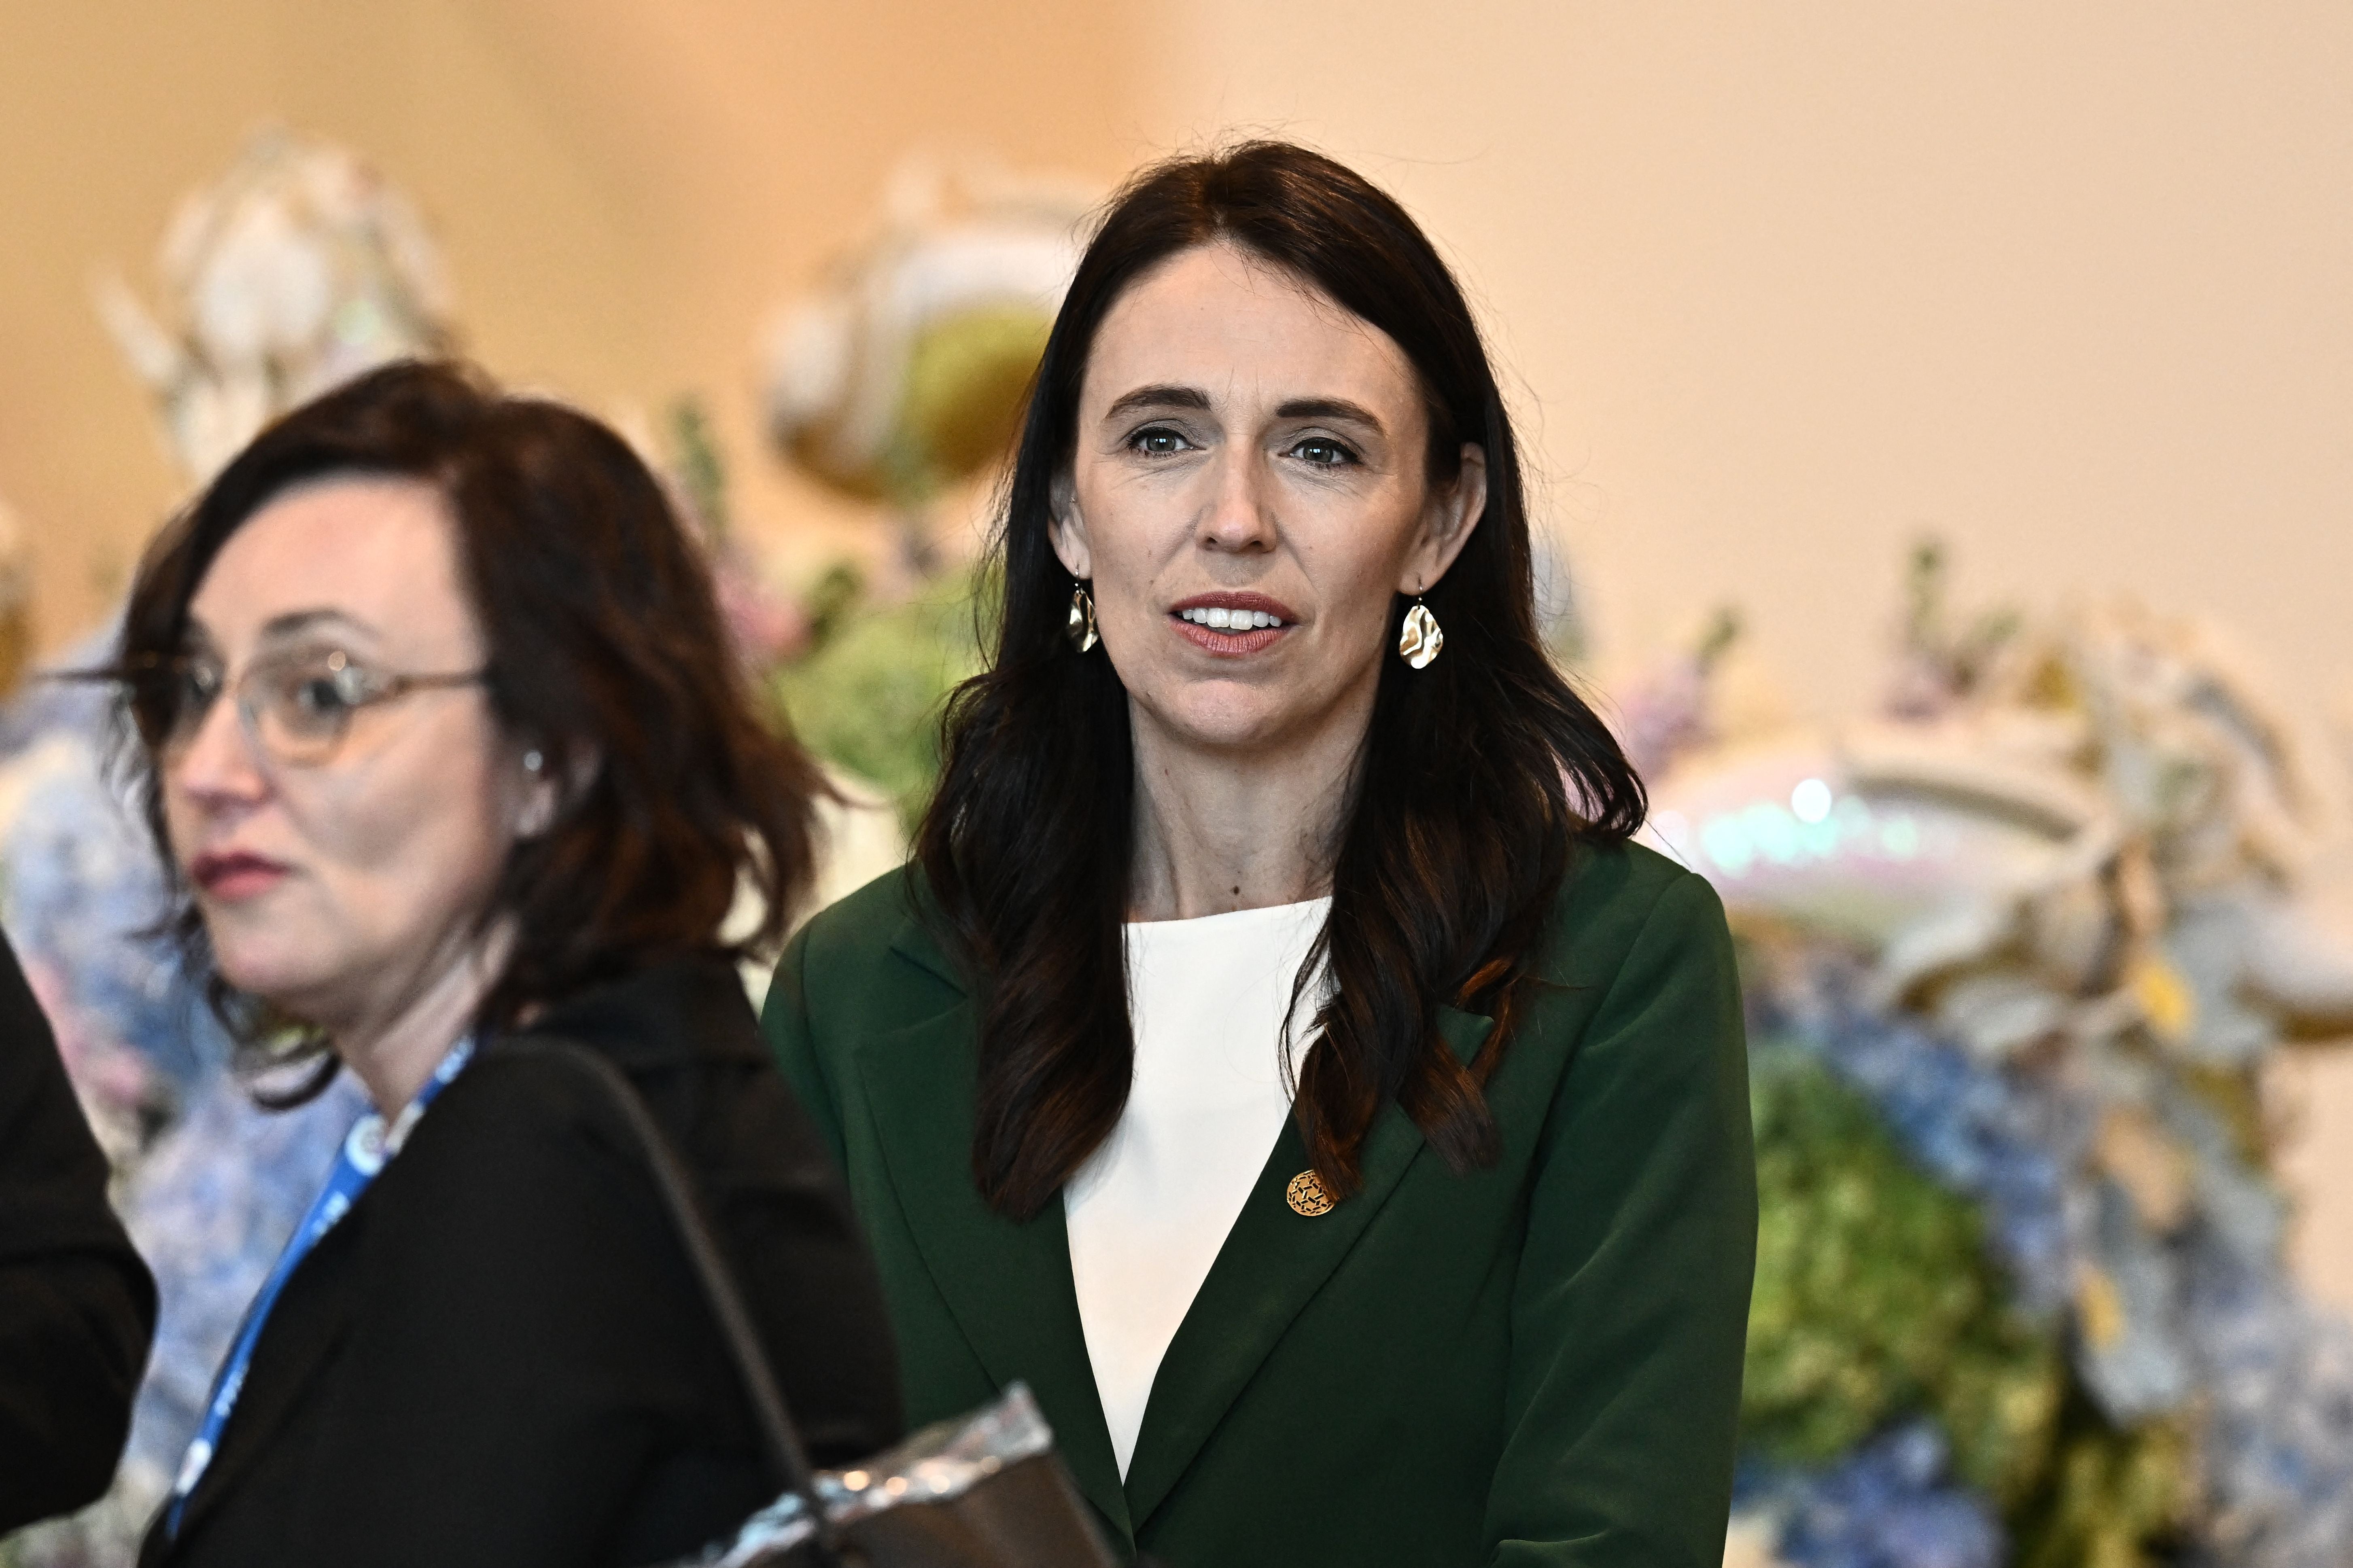 New Zealand’s prime minister Jacinda Ardern looks on as she attends the “APEC Leaders’ Dialogue with ABAC” event during the Asia-Pacific Economic Cooperation (APEC) summit in Bangkok on 18 November 2022